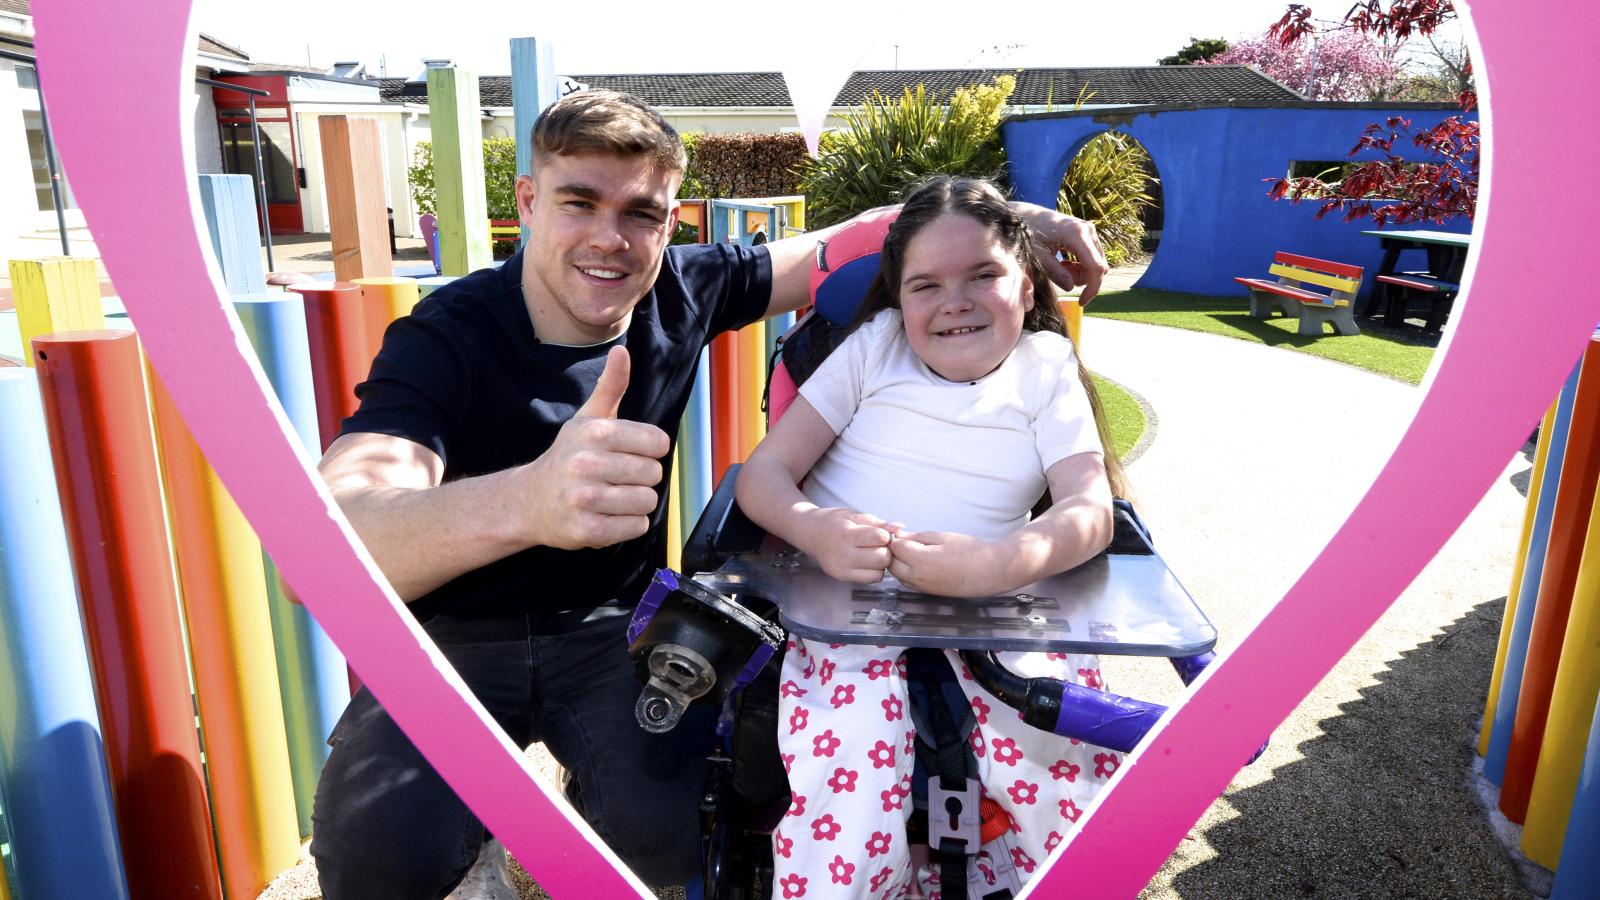 Leinster and Ireland Rugby Player, and LauraLynn ambassador Garry Ringrose launches Children’s Hospice Week 2023 at LauraLynn, alongside 11-year-old Natalia Zalewski. 